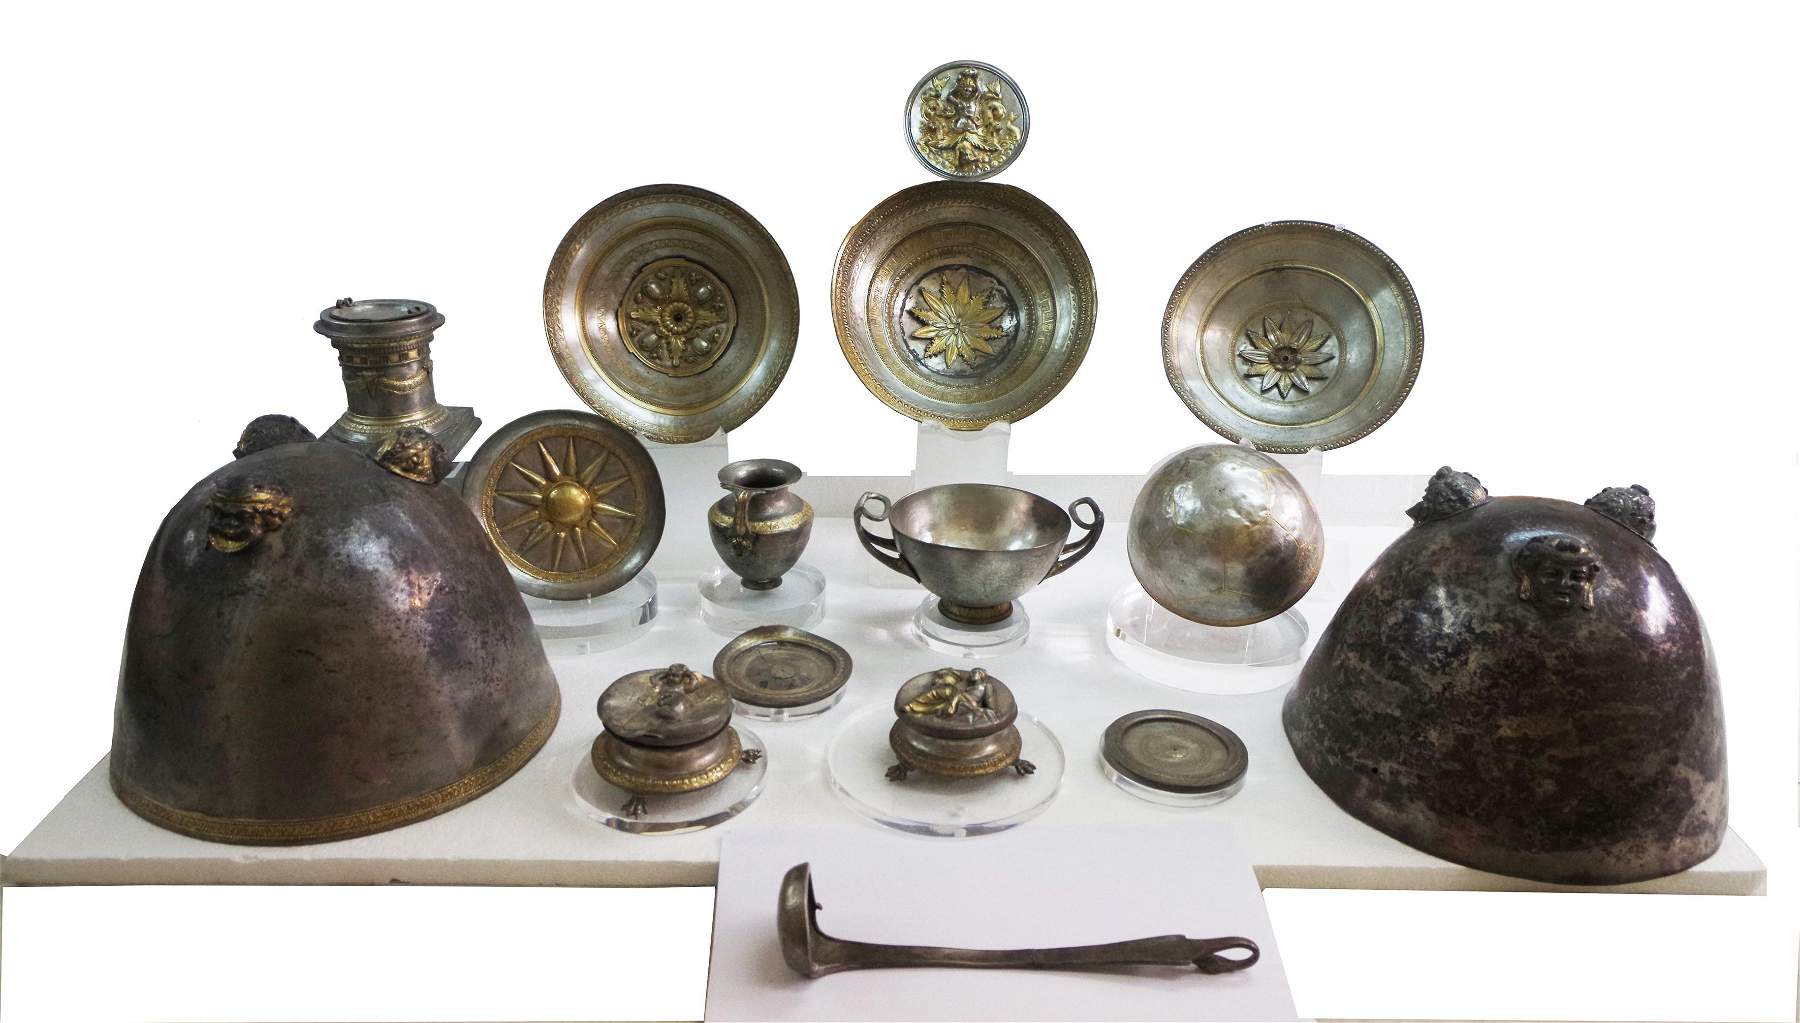 Morgantina silverware will remain in Sicily forever: agreement signed between Salinas Museum and Metropolitan